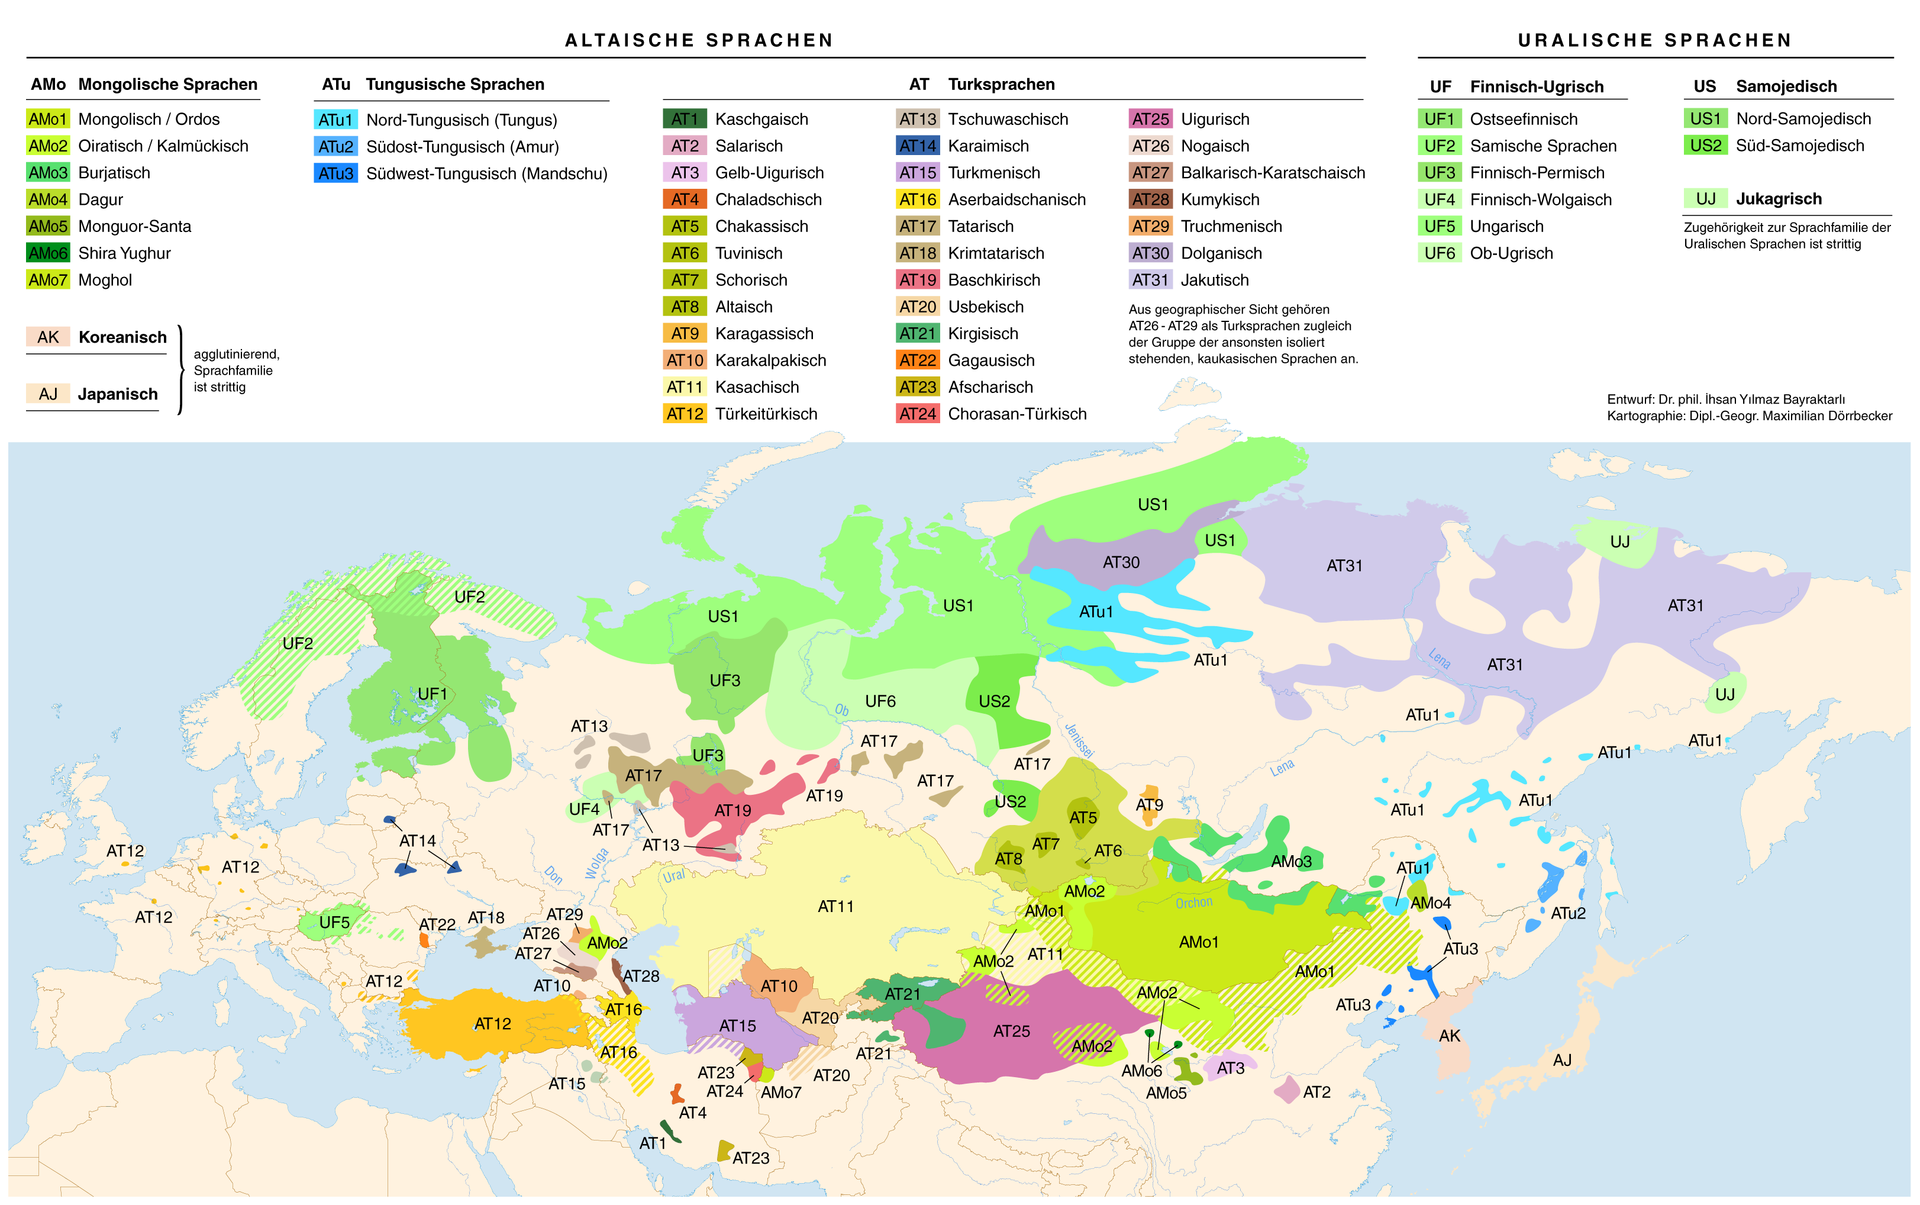 1920px-Linguistic_map_of_the_Altaic%2C_Turkic_and_Uralic_languages.png